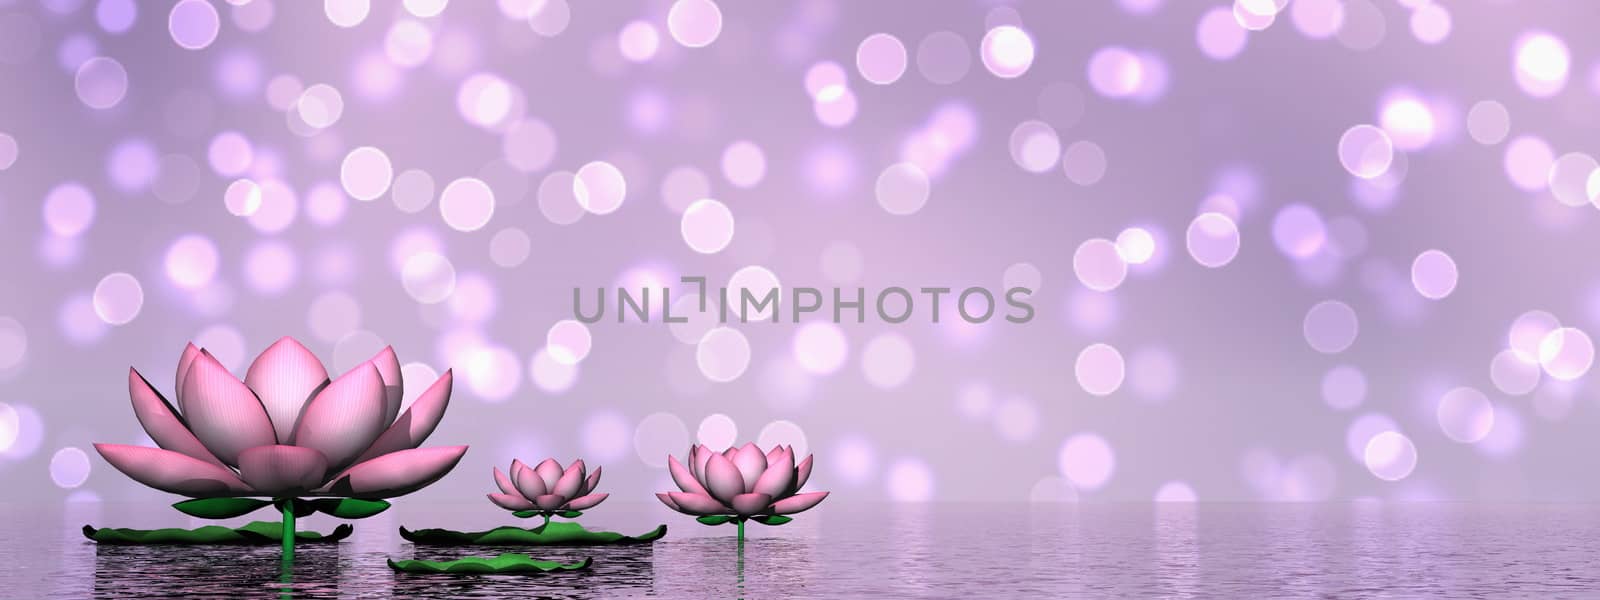 Lily flowers - 3D render by Elenaphotos21